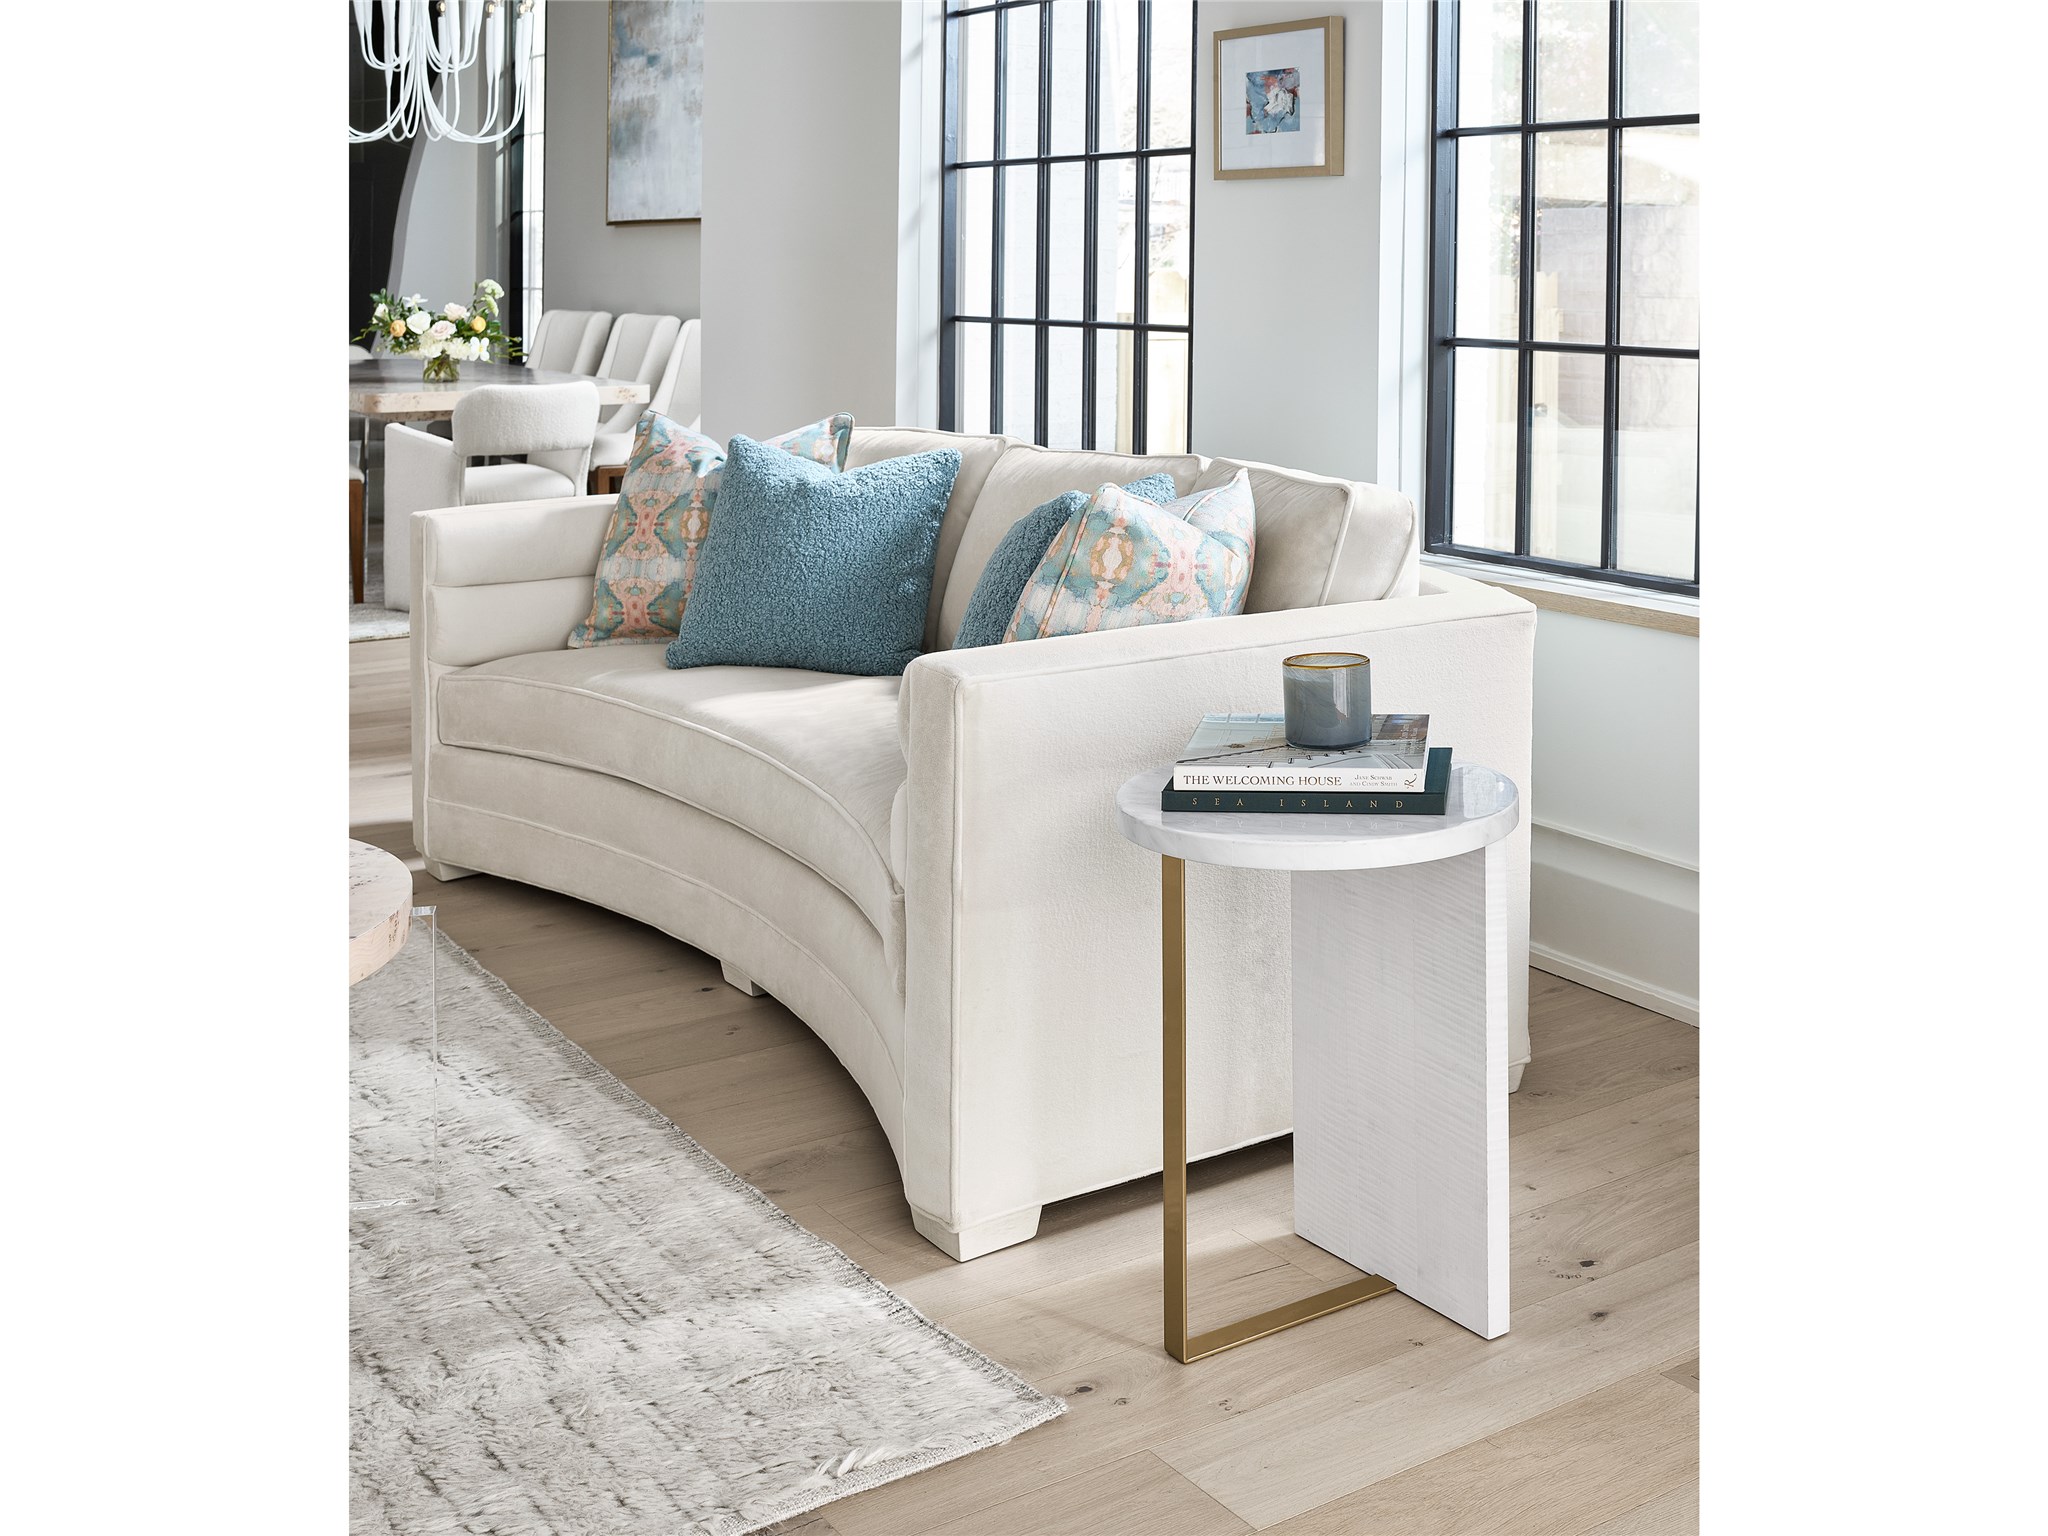 Reverie Round Accent Table